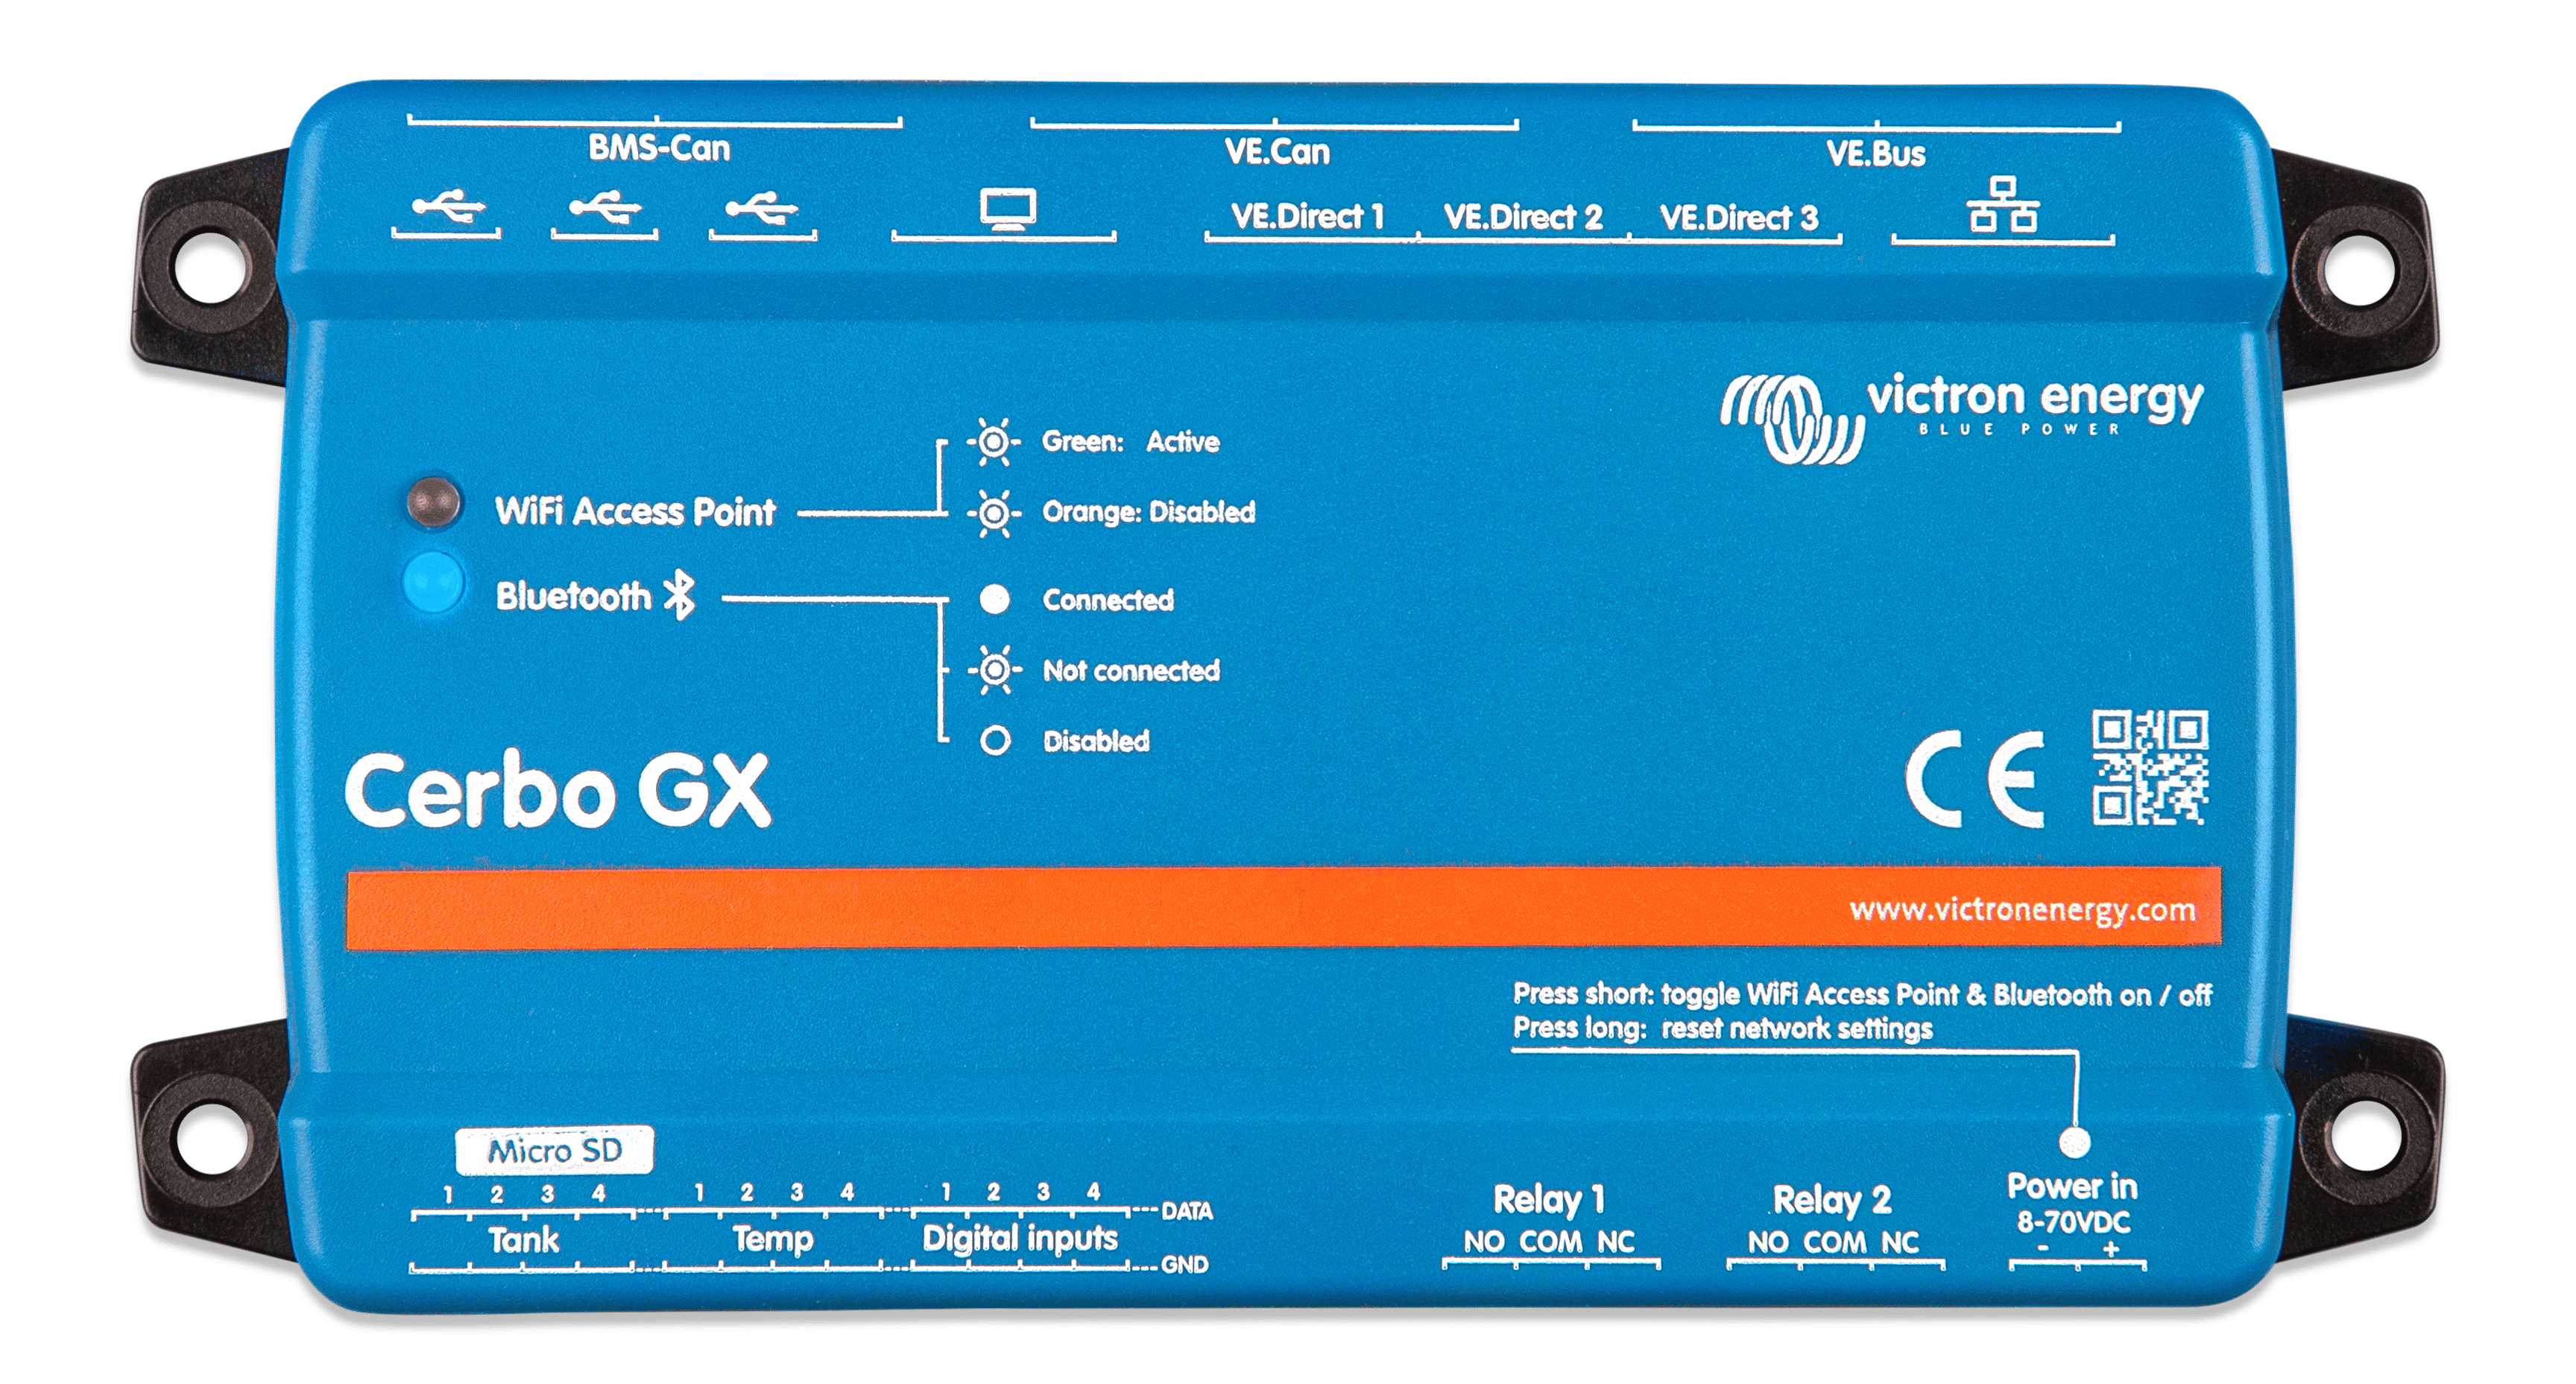 What is the connected load of the Cerbo GX.  I need to allow for this load in my design.